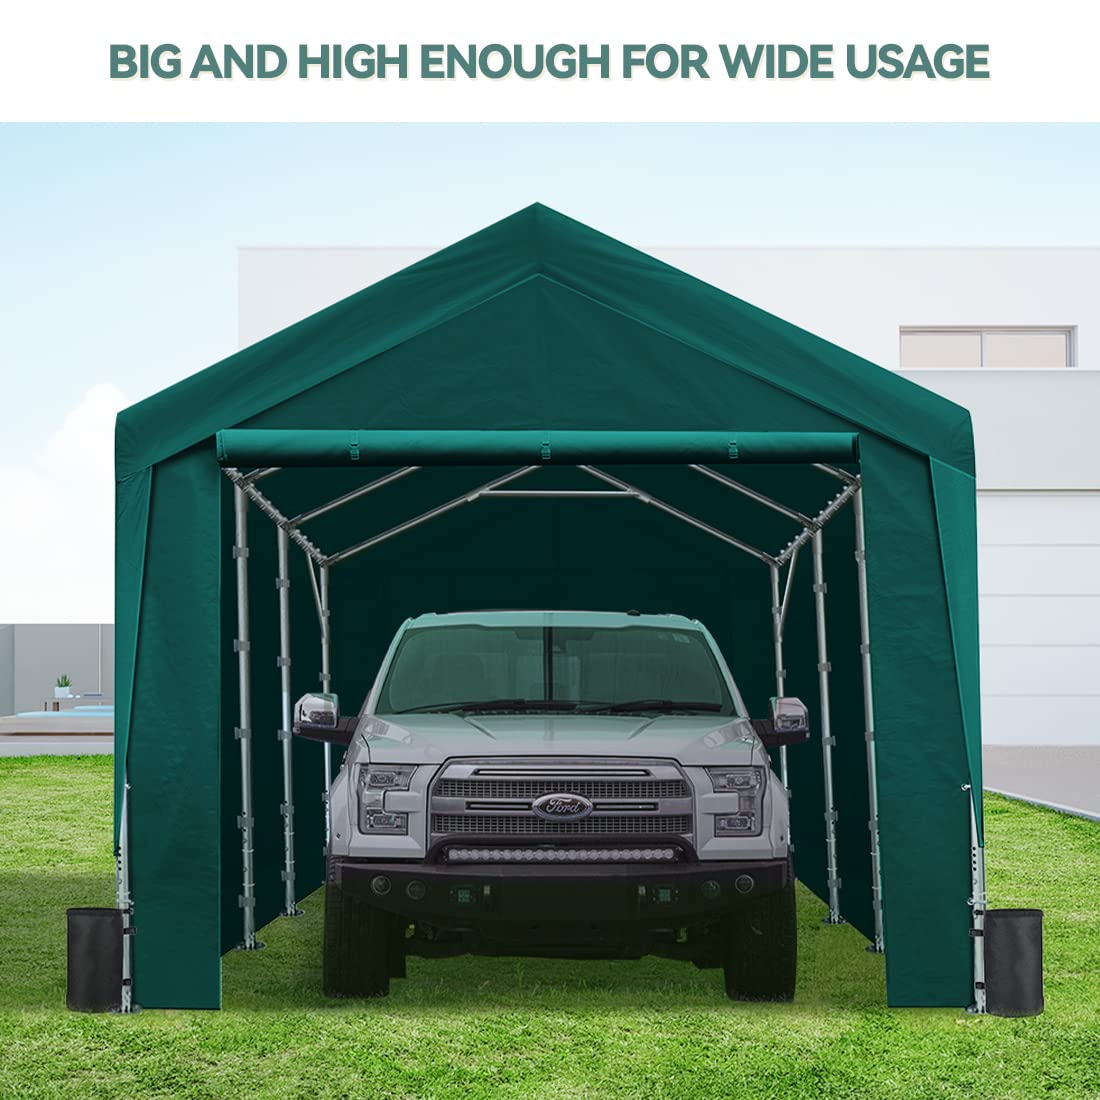 ADVANCE OUTDOOR 12x20 ft Heavy Duty Carport with Sidewalls and Doors, Adjustable Height from 9.5 to 11 ft, Car Canopy Garage Party Tent Boat Shelter 8 Reinforced Poles 4 Sandbags,Green (017G-2) With Sidewall Green